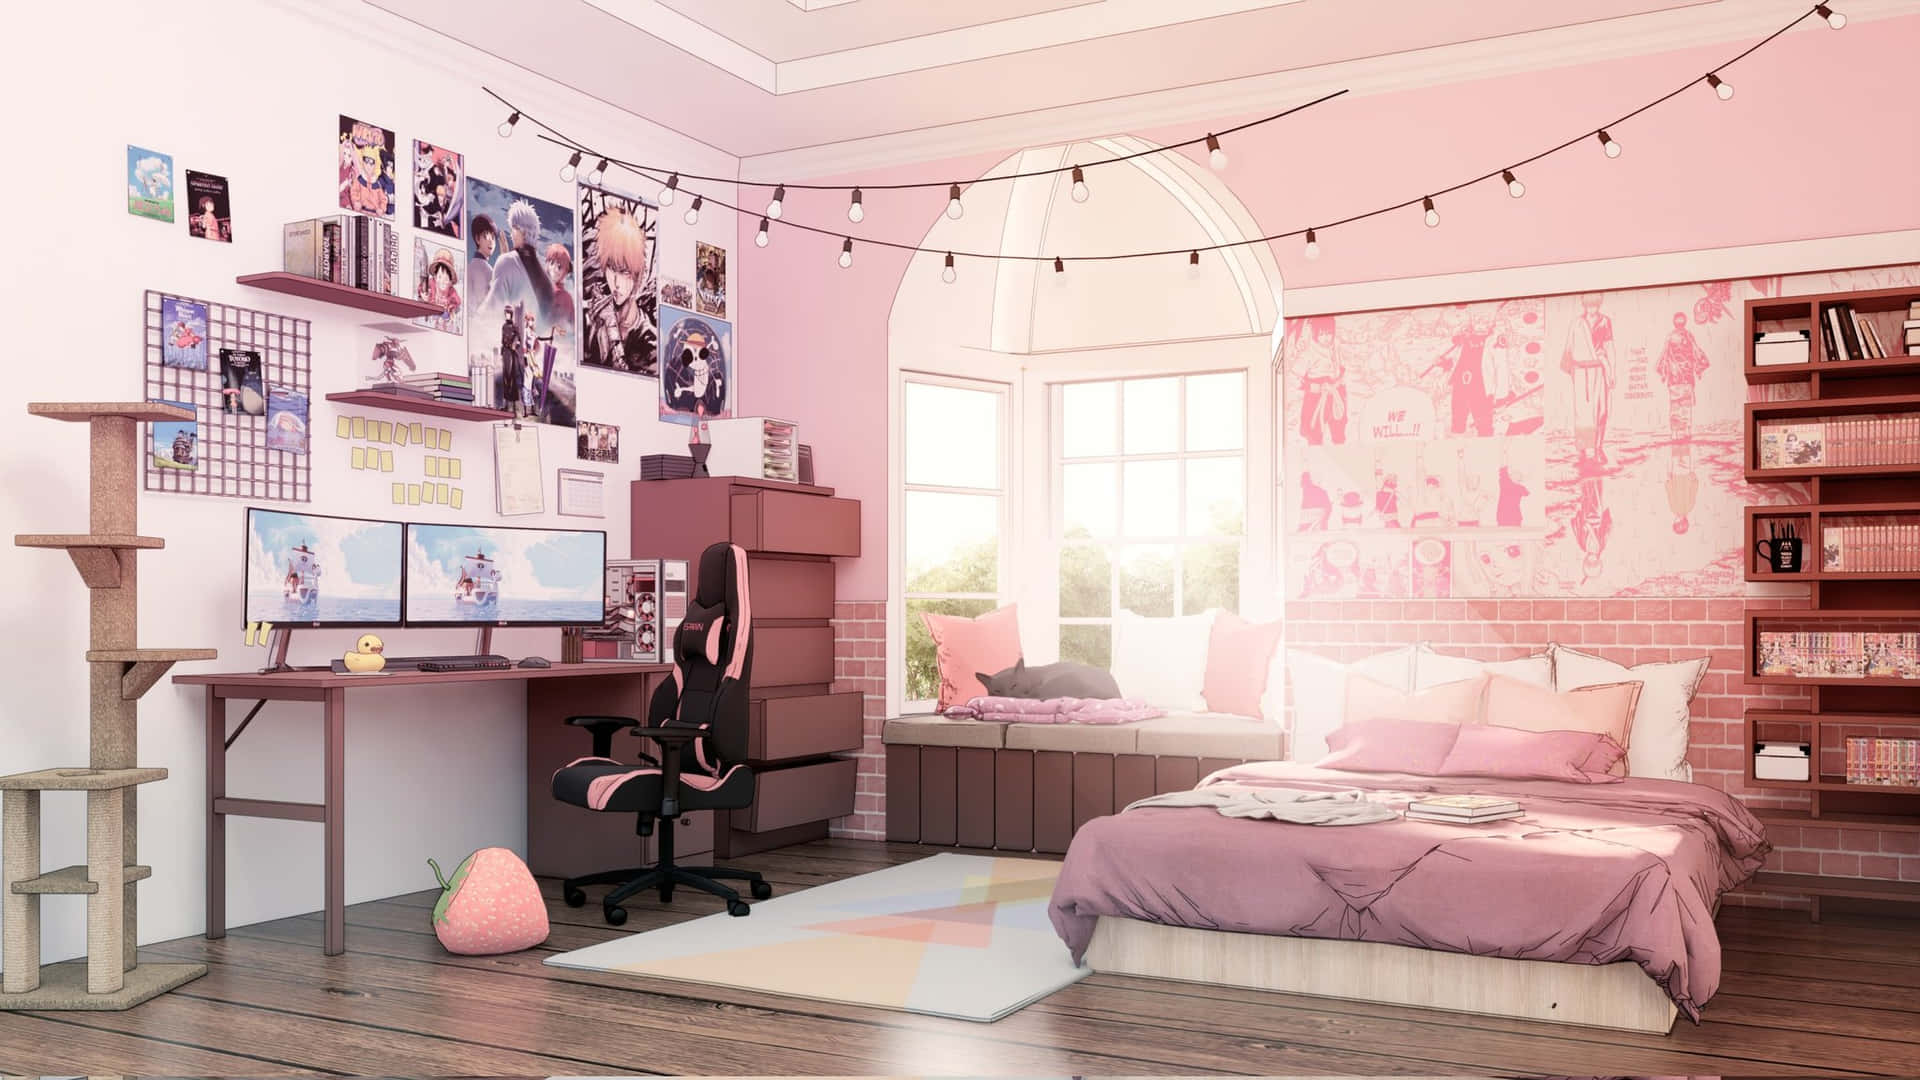 Download A Pink Bedroom With A Desk And A Cat  Wallpaperscom